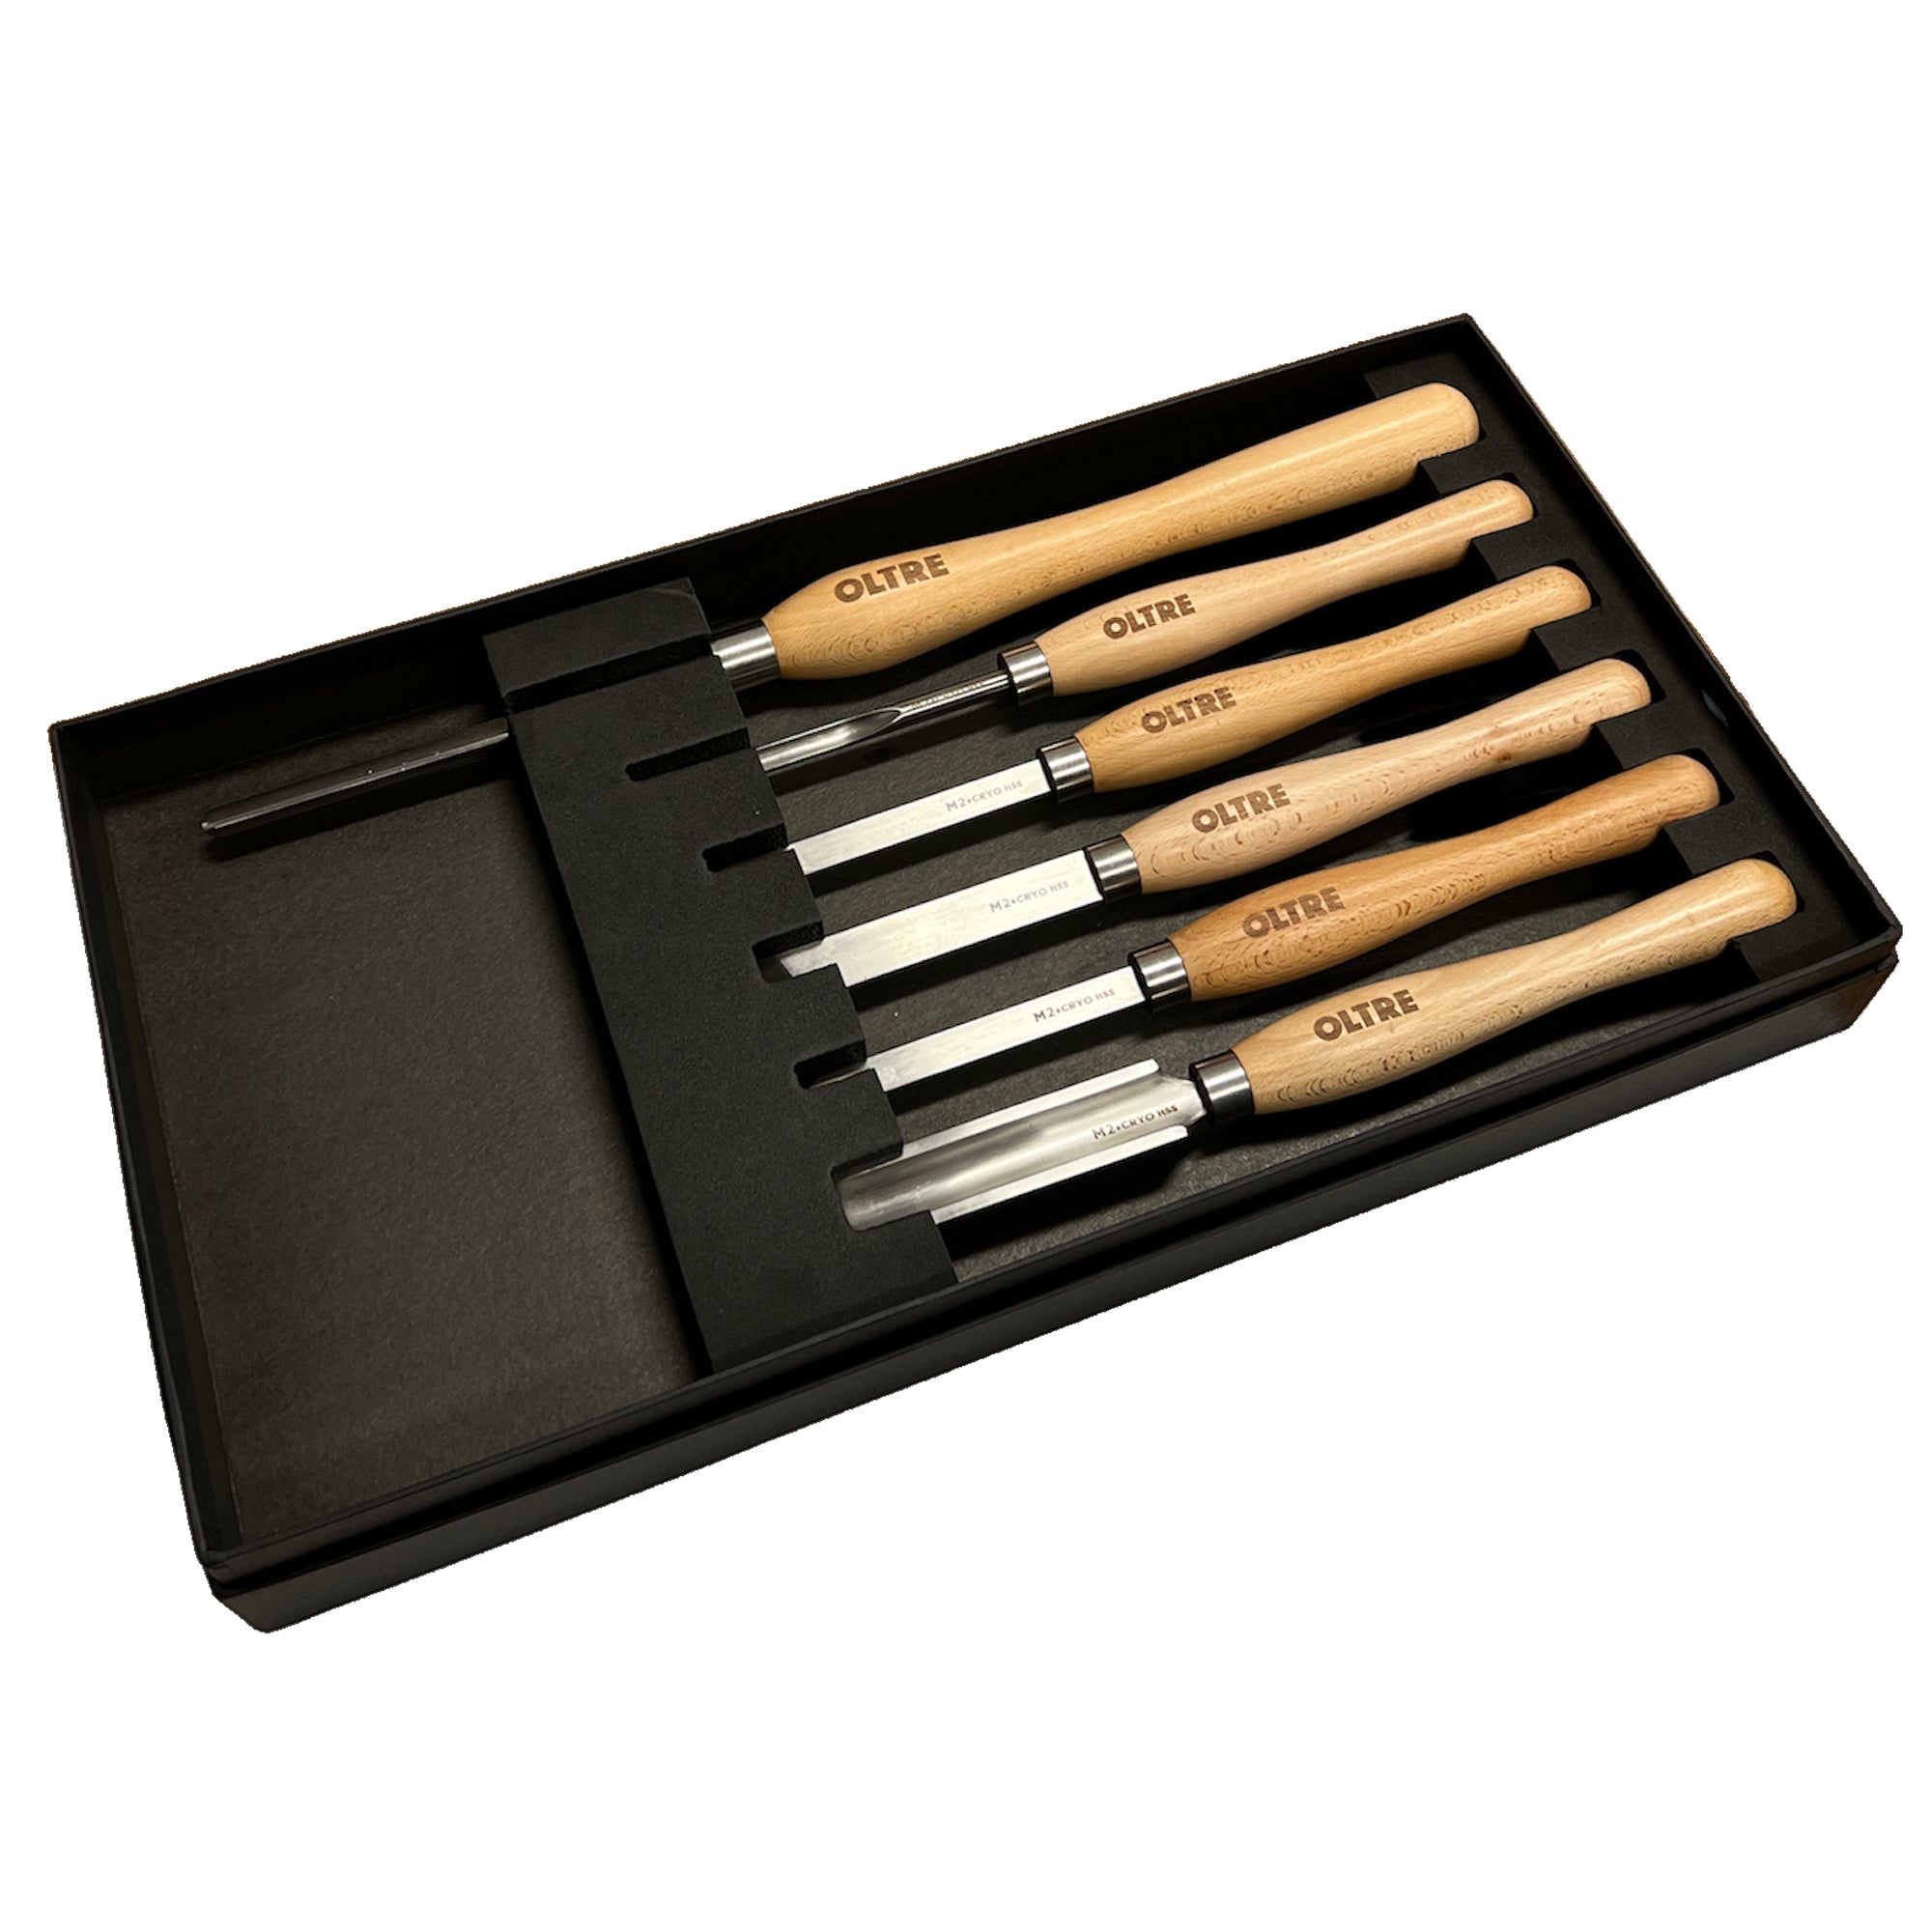 6Pce Woodturning Chisel Tool M2 CRYO HSS (5 Small + 1 Medium Turning Tool) Set by Oltre